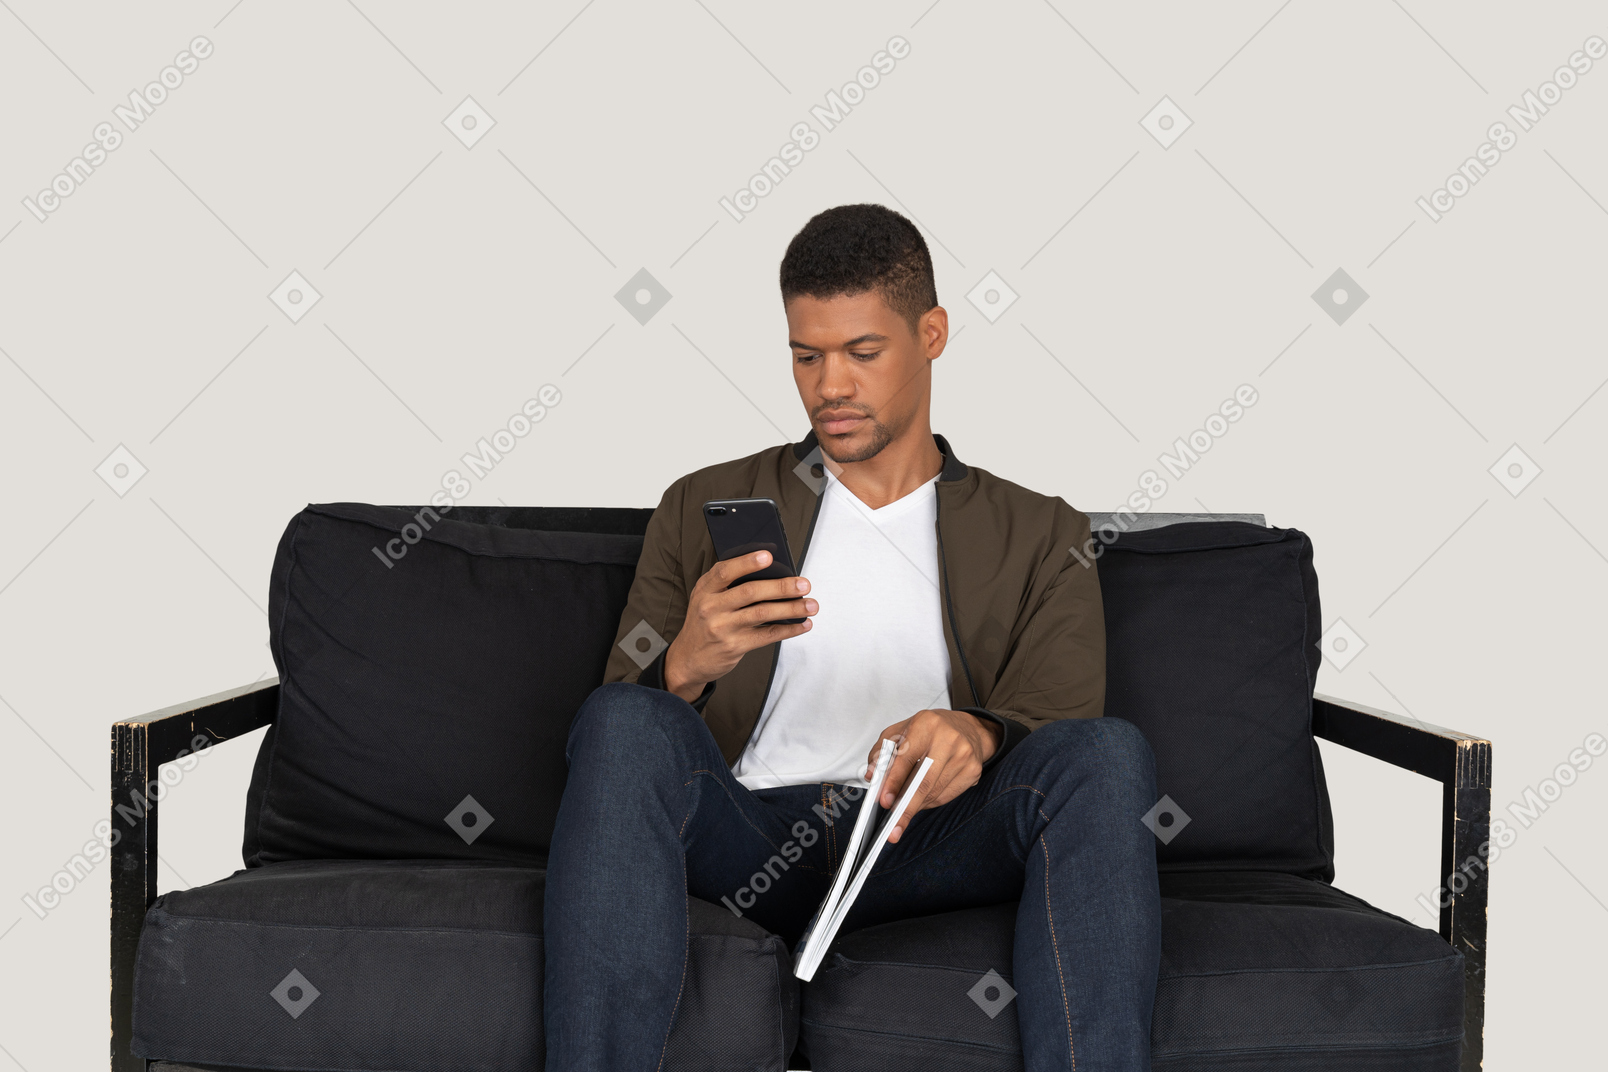 Front view of young man sitting on a sofa holding a magazine while using phone